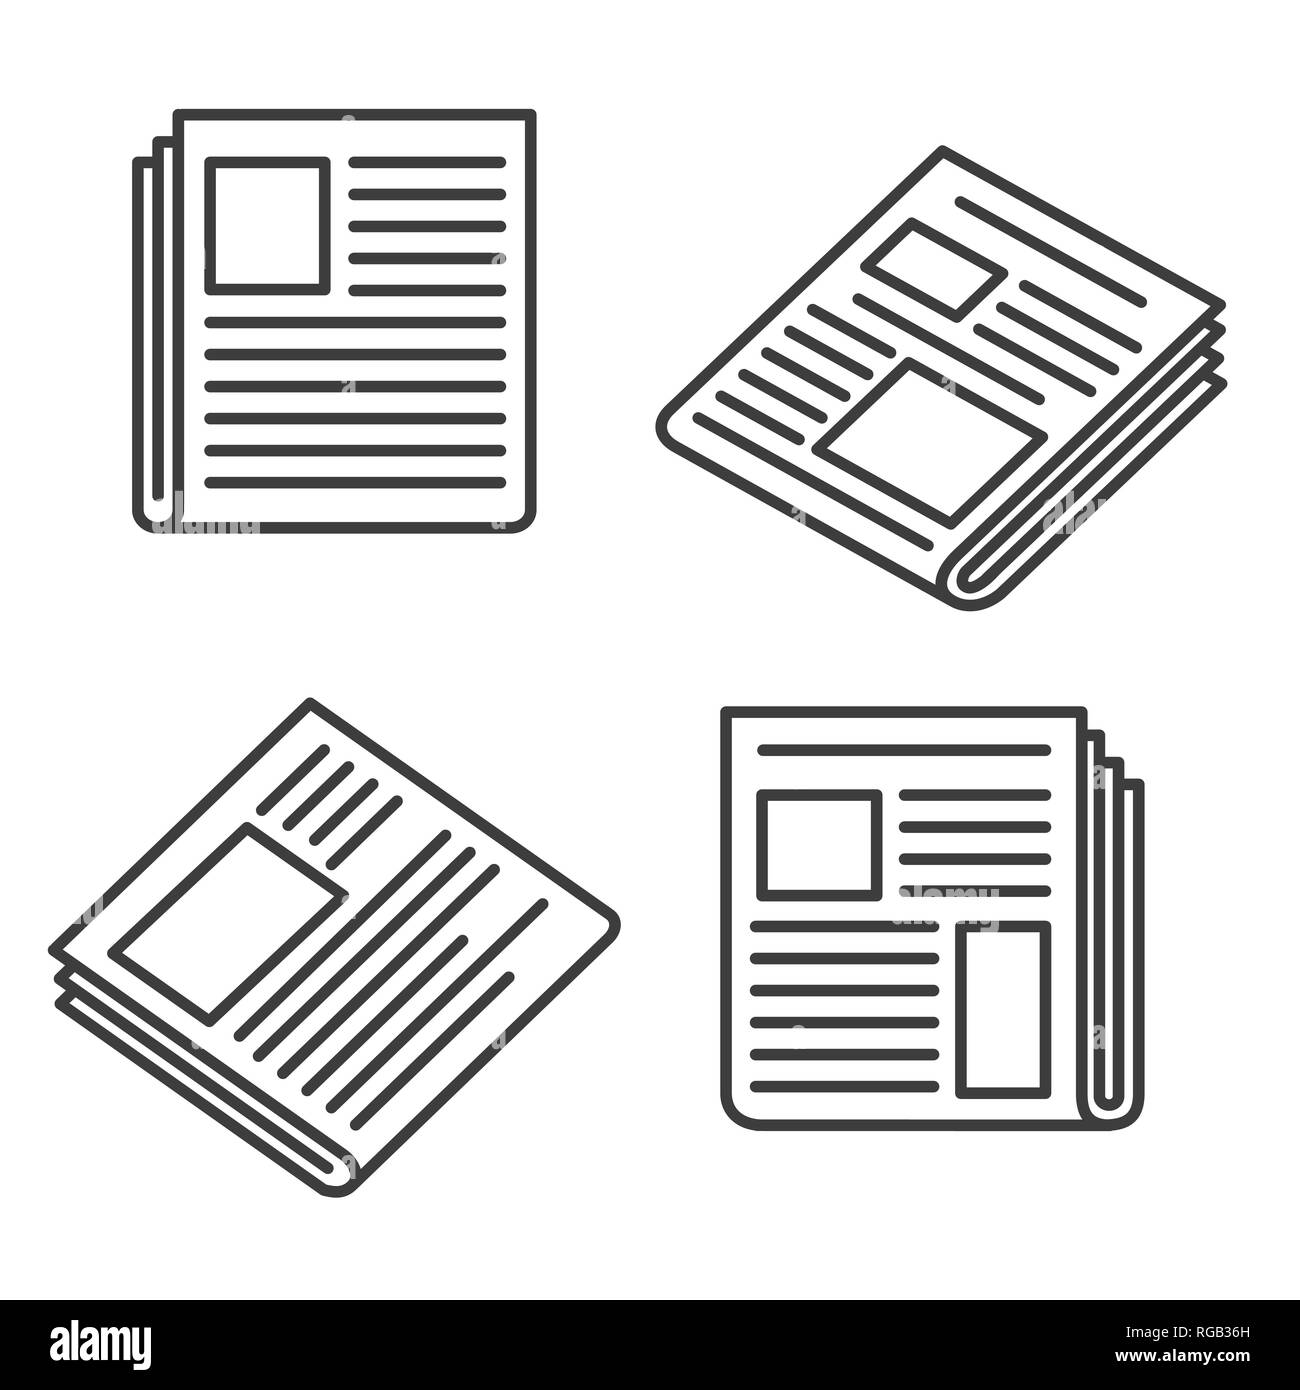 Newspaper icons. Small news press icon set for web, articles and broadsheet, website media and printing paper signs, vector illustration Stock Vector